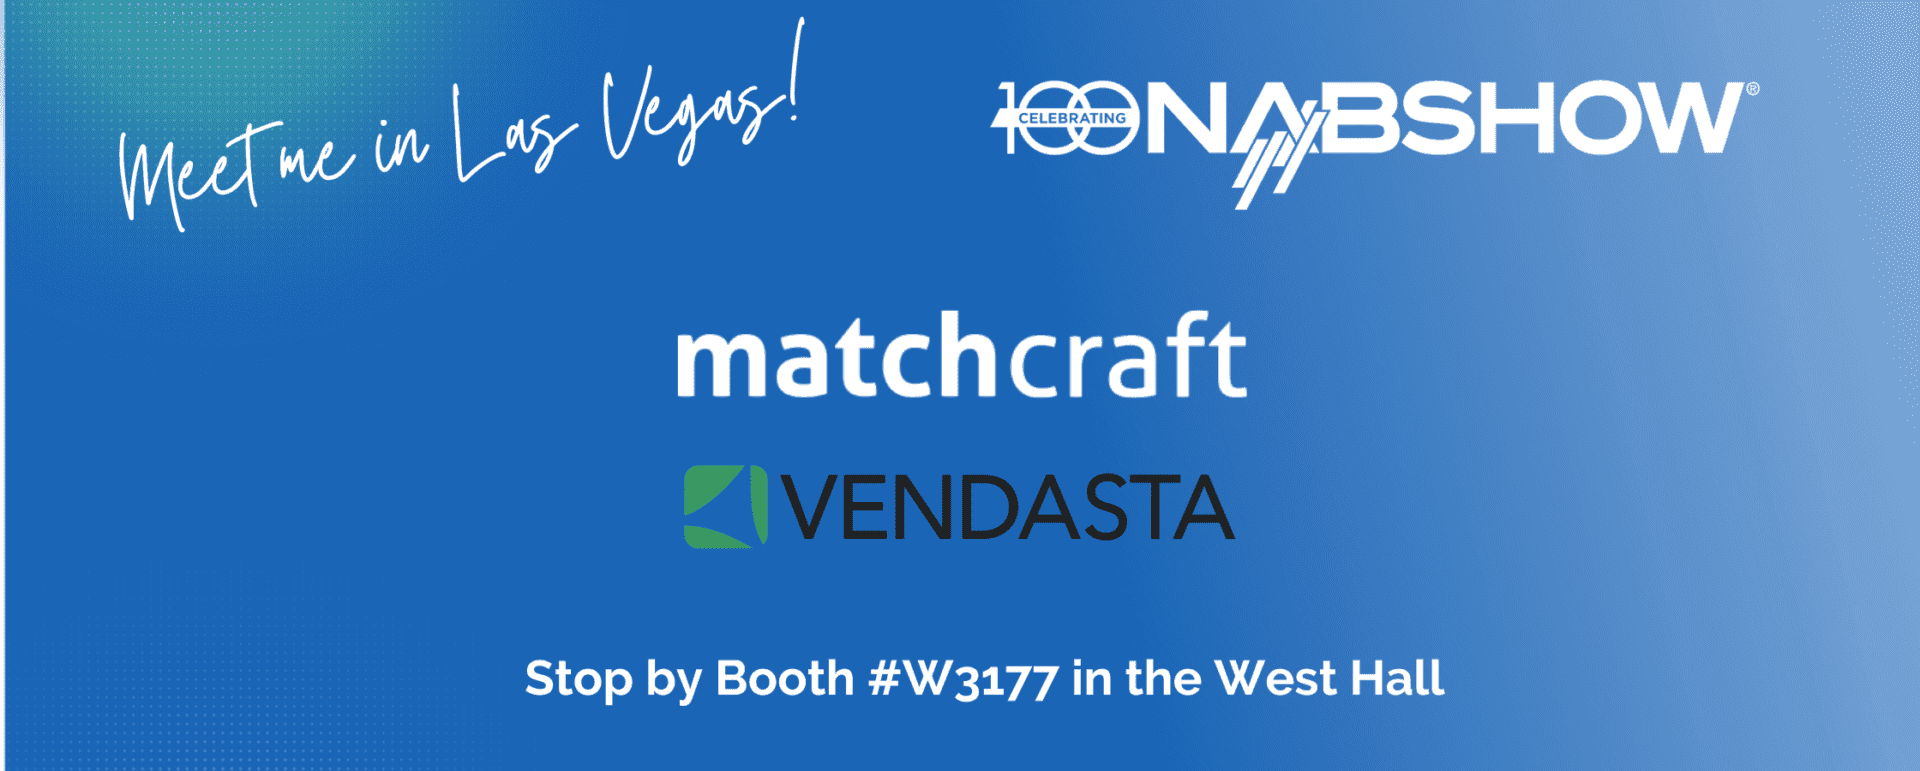 MatchCraft is heading to NAB 100th Anniversary Show